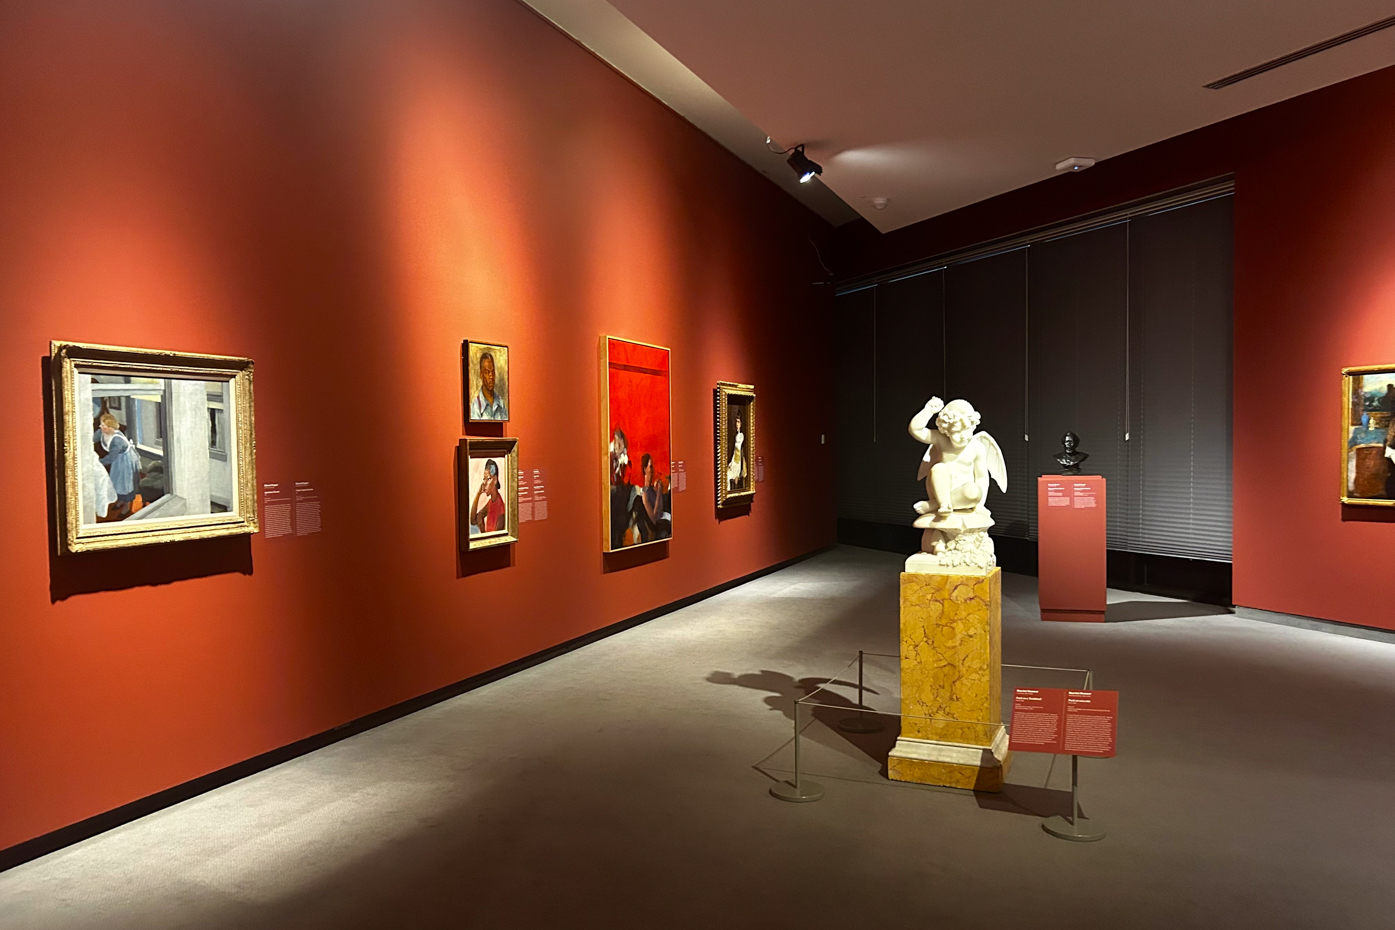 A view of the gallery featuring “Puck on a toadstool” by Harriet Hosmer. She was born in 1830 and was sometimes known to flow between femininity and masculinity. In William Shakespeare’s “A Midsummer Night’s Dream,” Puck is not assigned a gender in the play and can be played by any person.